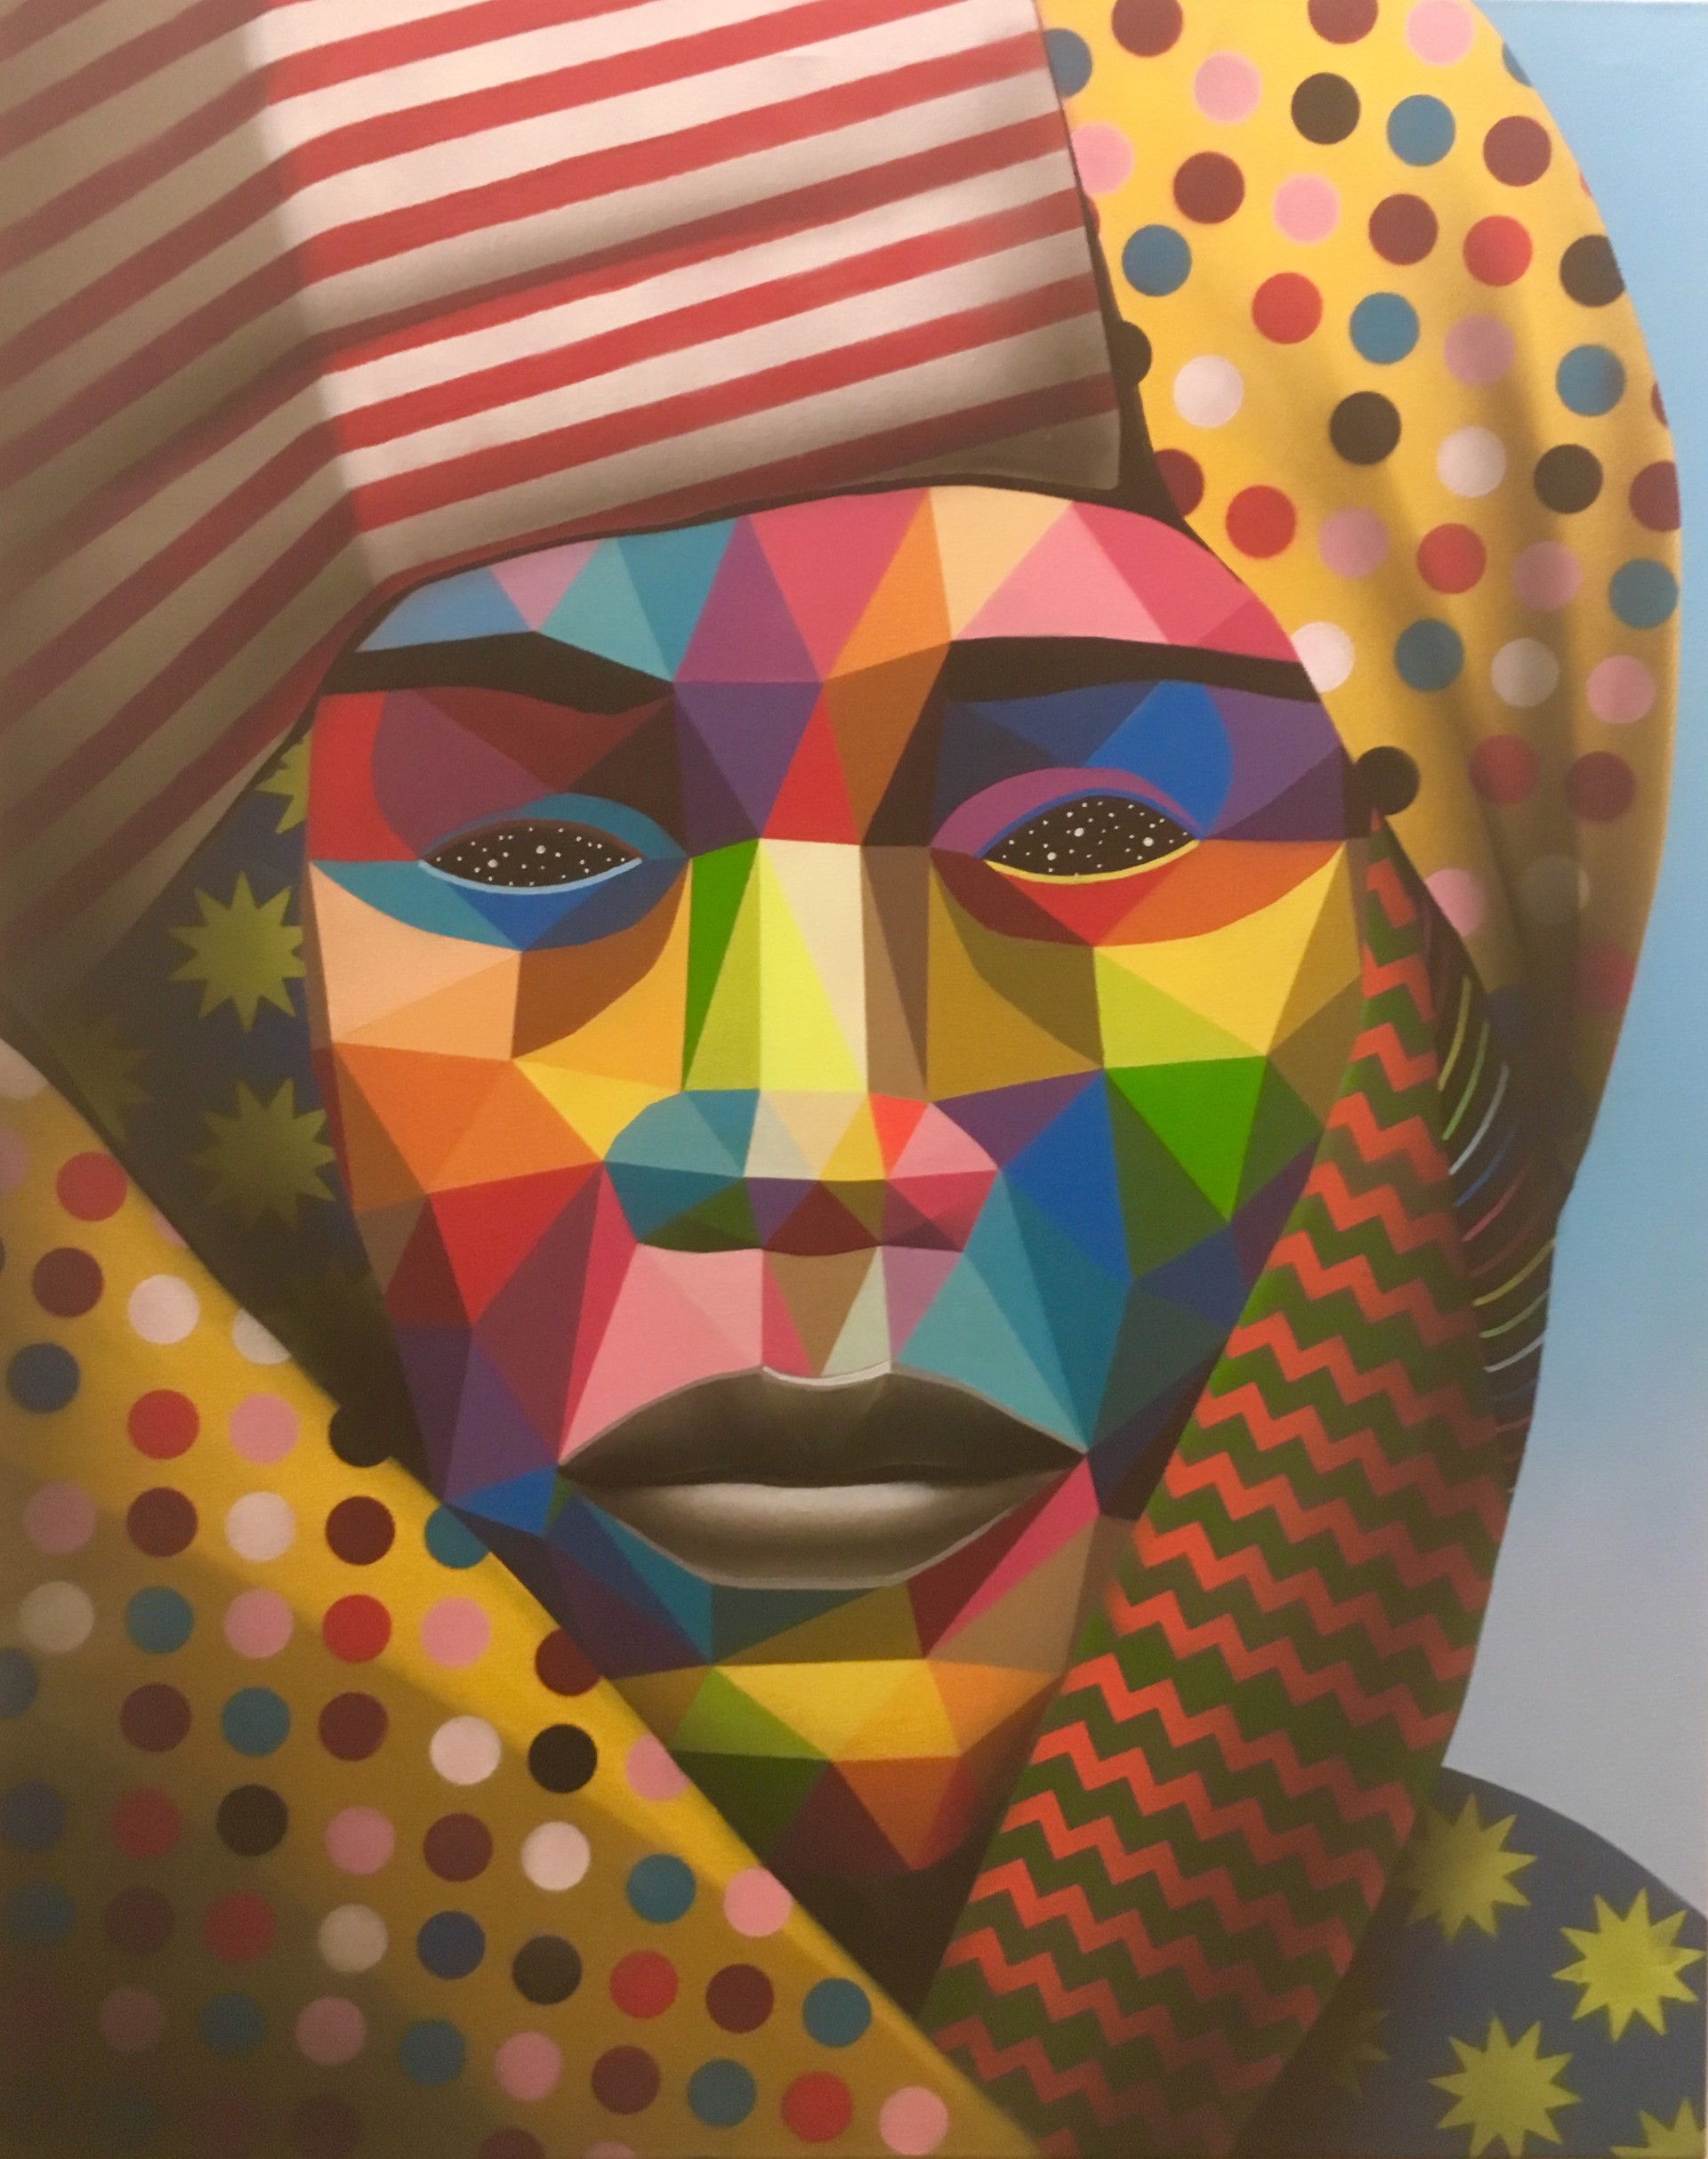 Prince From The Desert by Okuda San Miguel